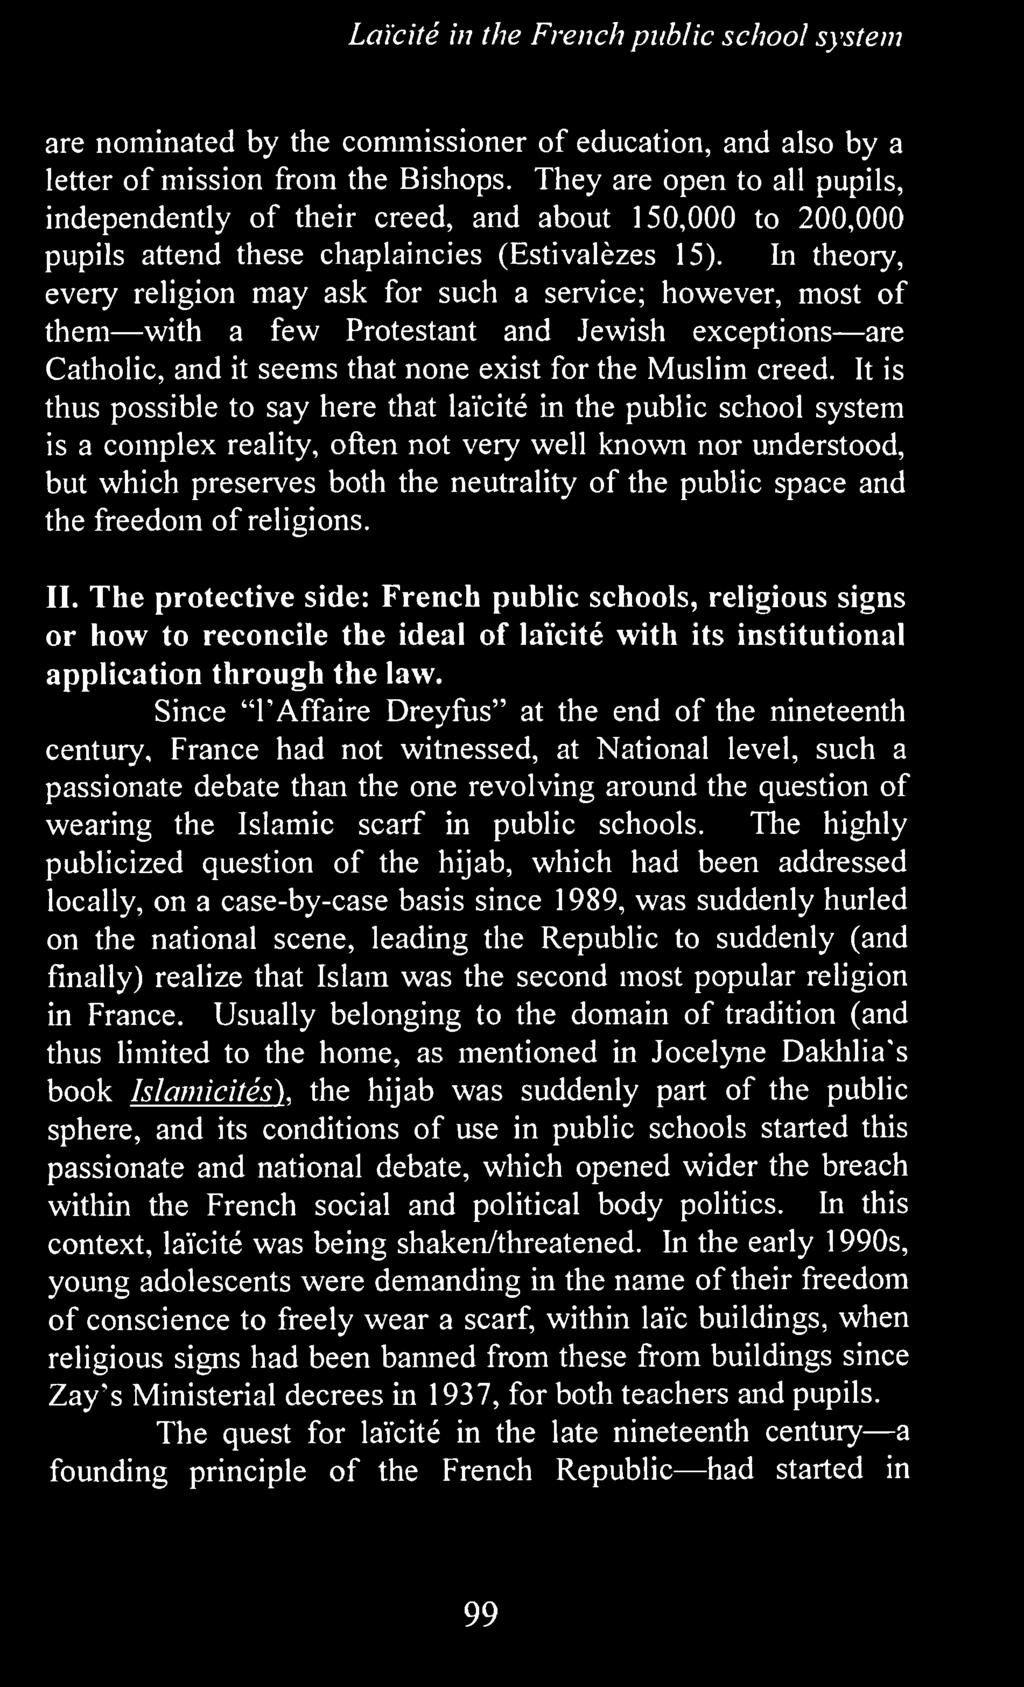 and the freedom of religions. II. The protective side: French public schools, religious signs or how to reconcile the ideal of laicite with its application through the law.